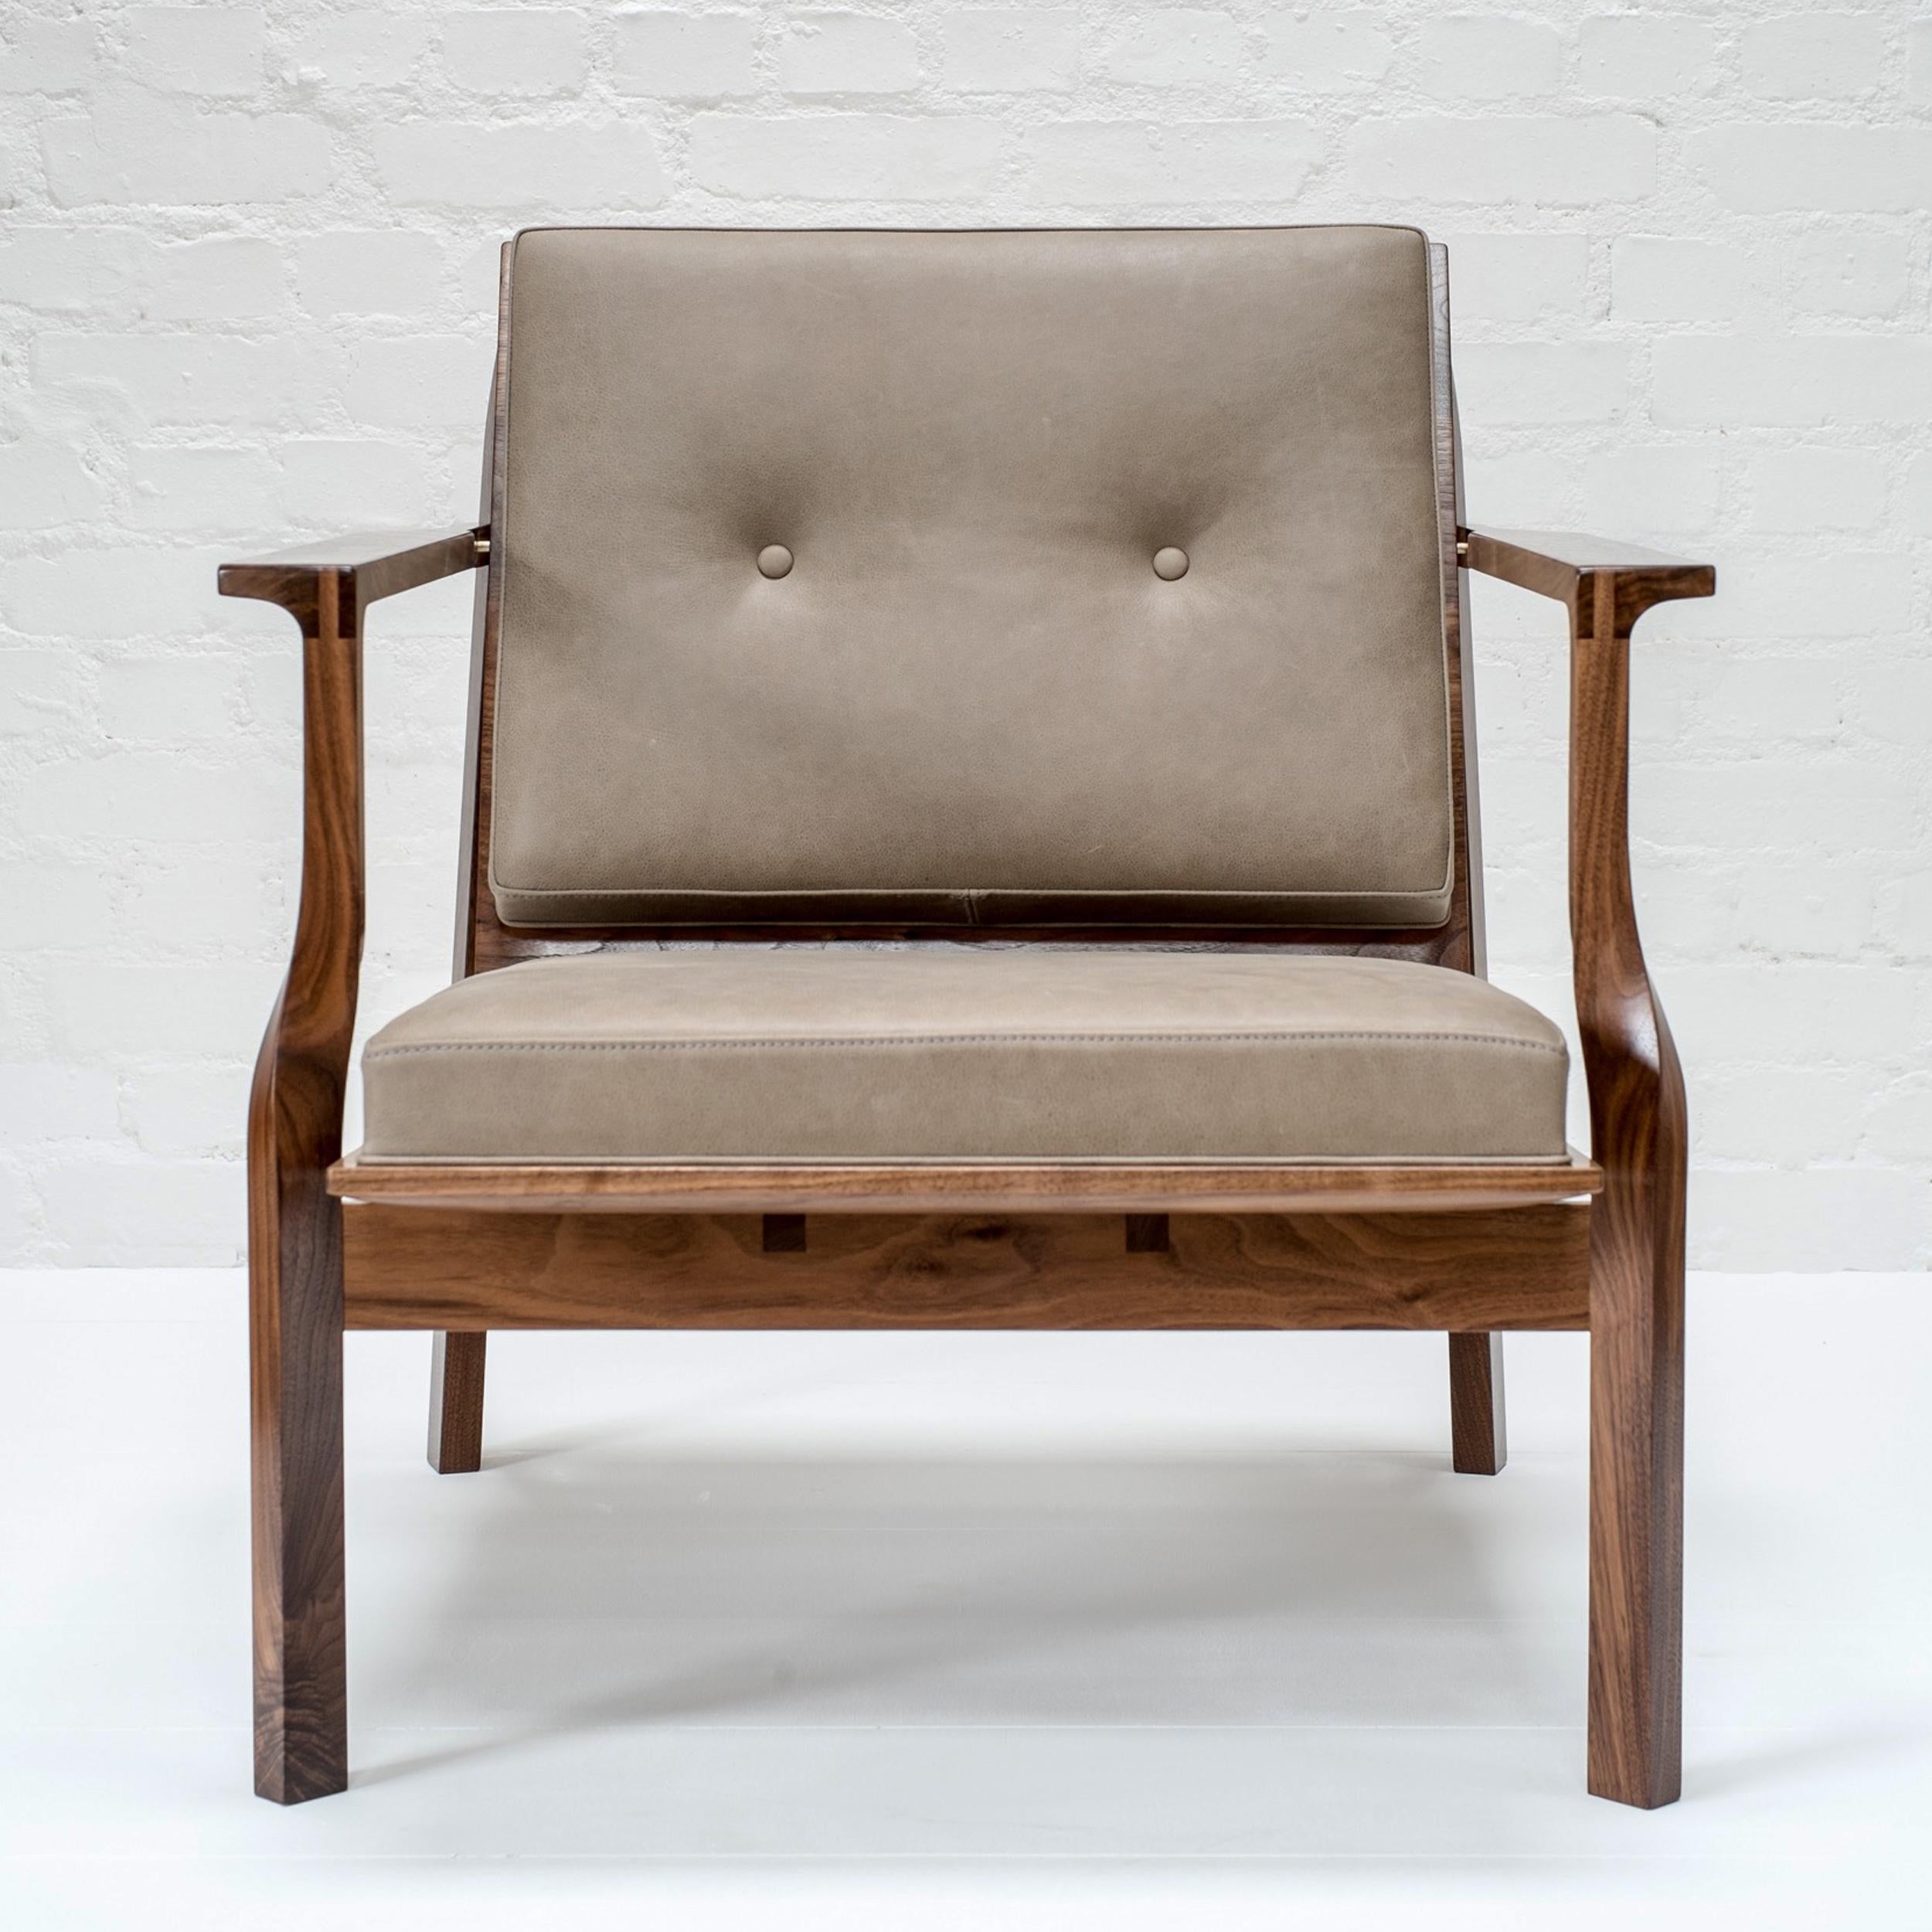 Hand sculpted American black walnut chair frame and seat with ash leather upholstery. Wooden and brass dowel detail.

Hand finished with natural oils and wax.

Upholstry, full seat (see suilven lounge chair) or seperate seat and back in a